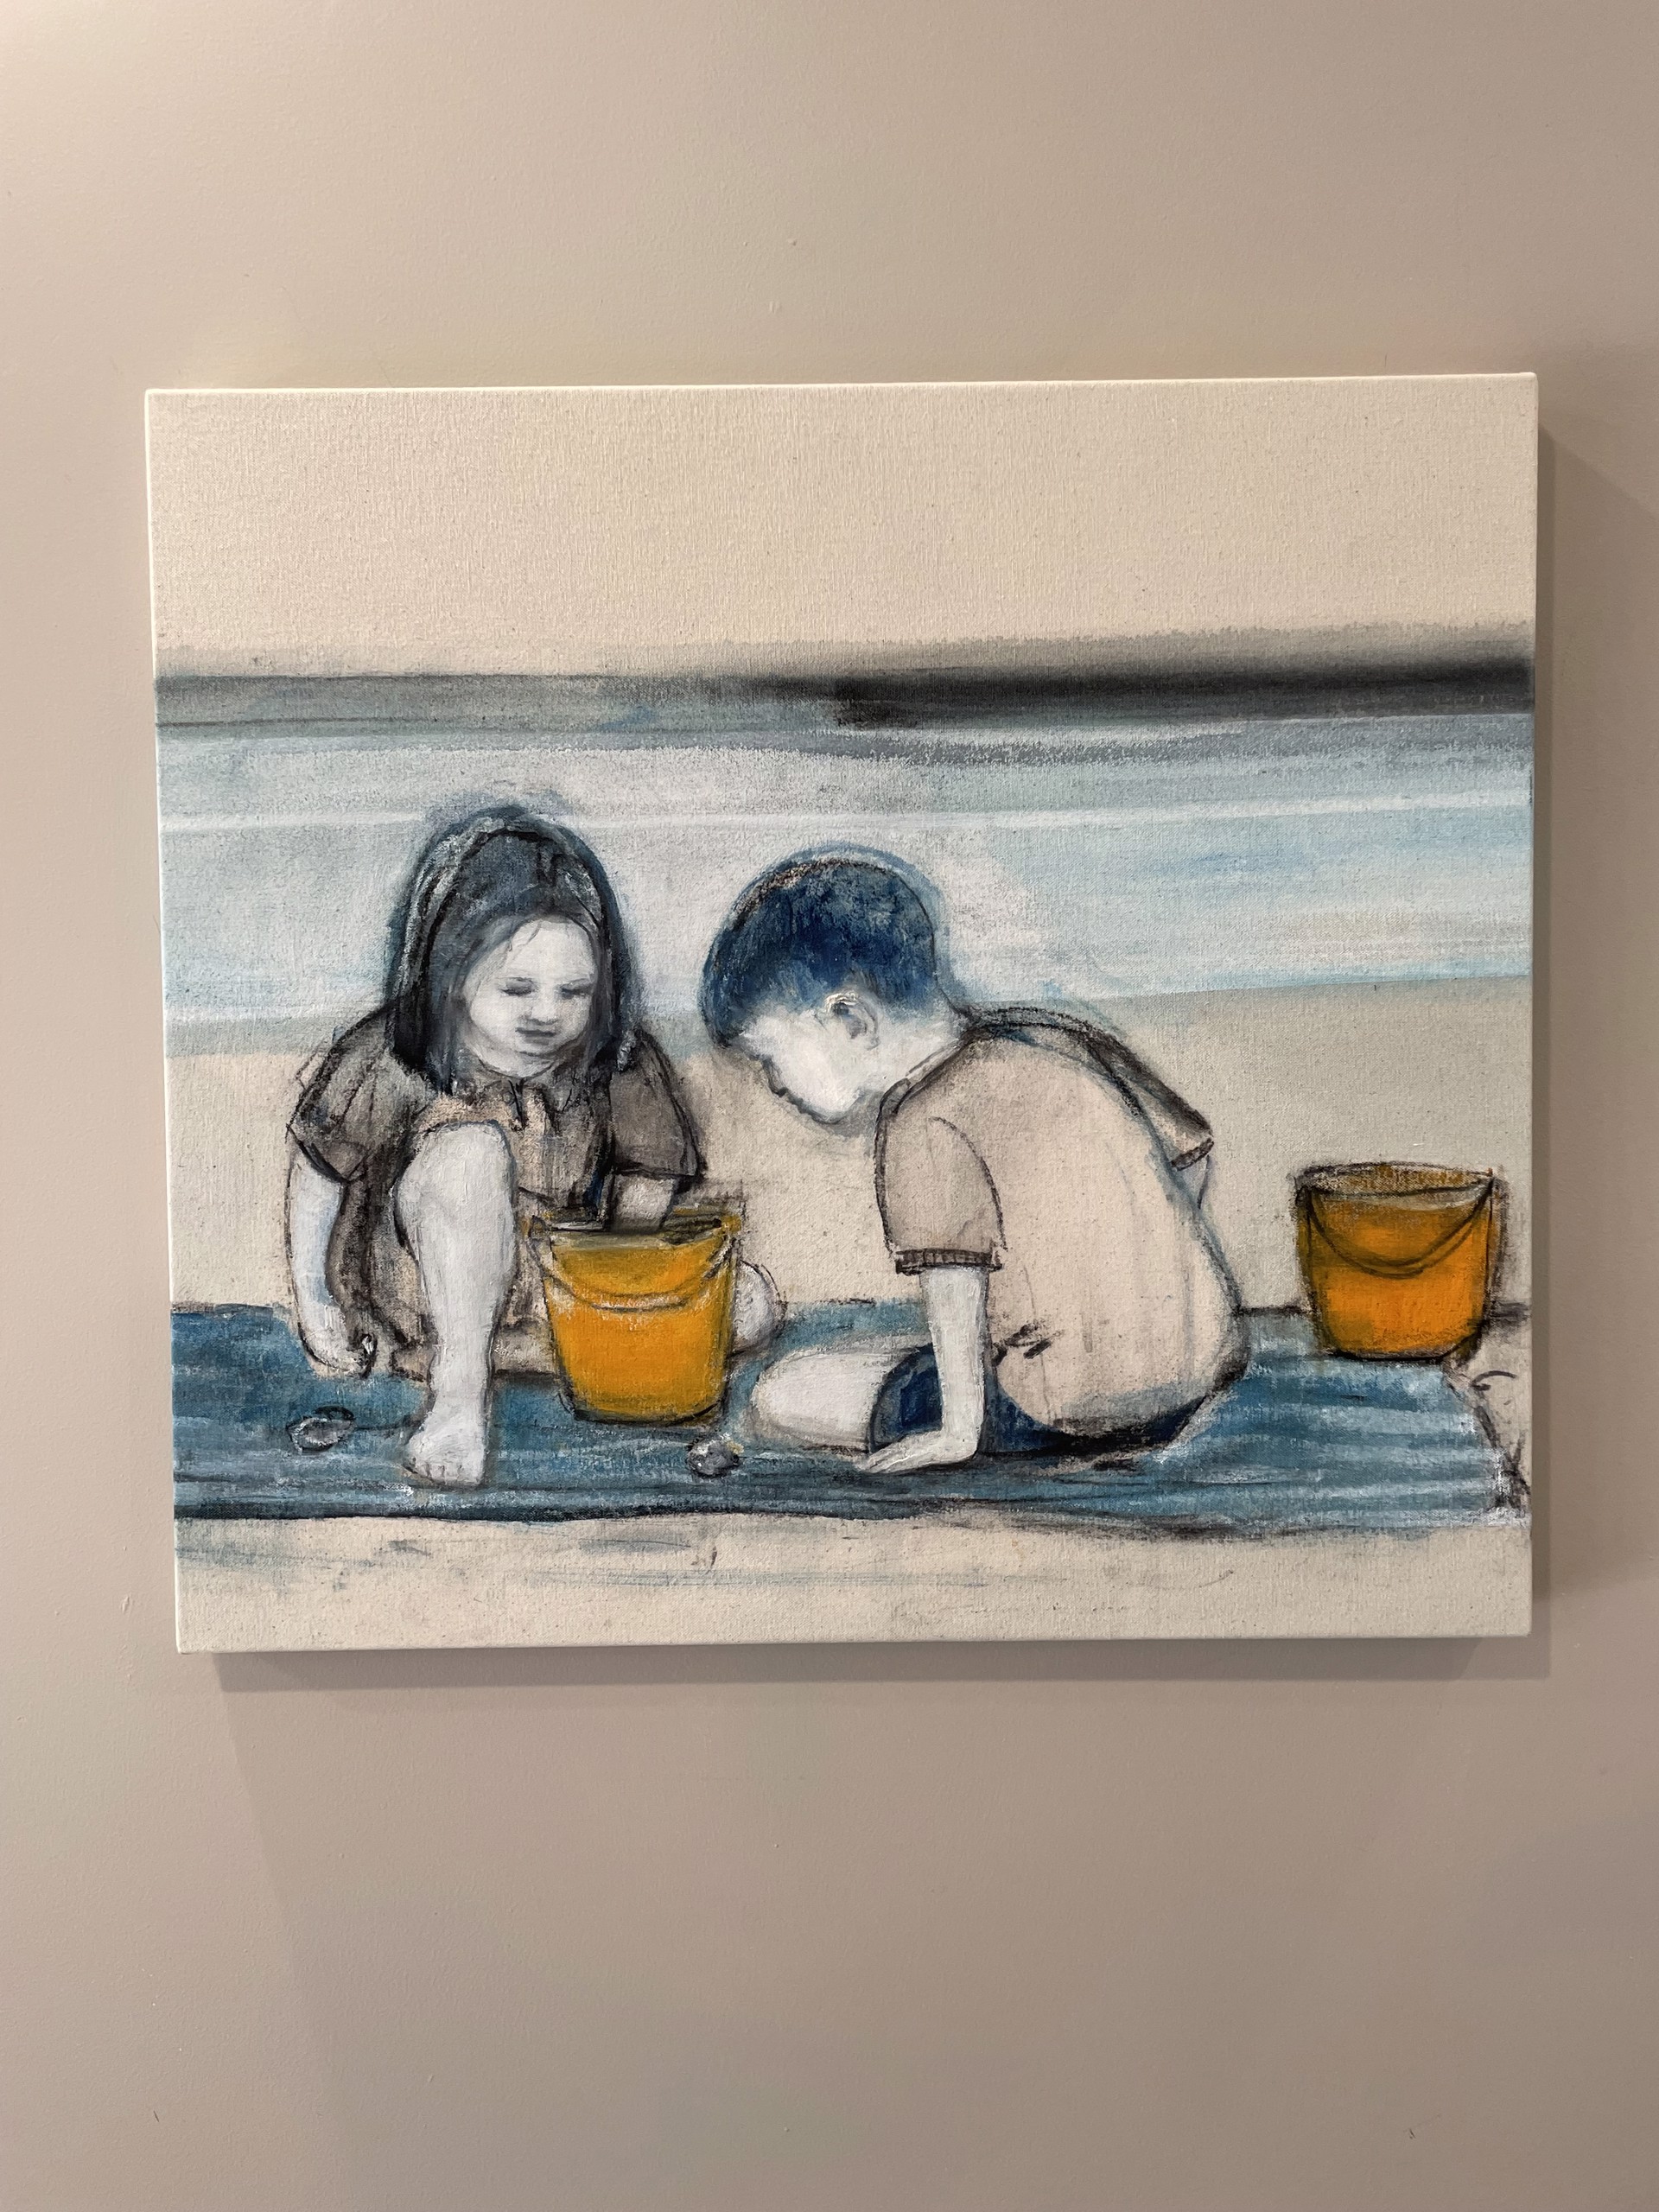 WE HAVE CRABS IN OUR BUCKET by CHRISTINA THWAITES (Figures)